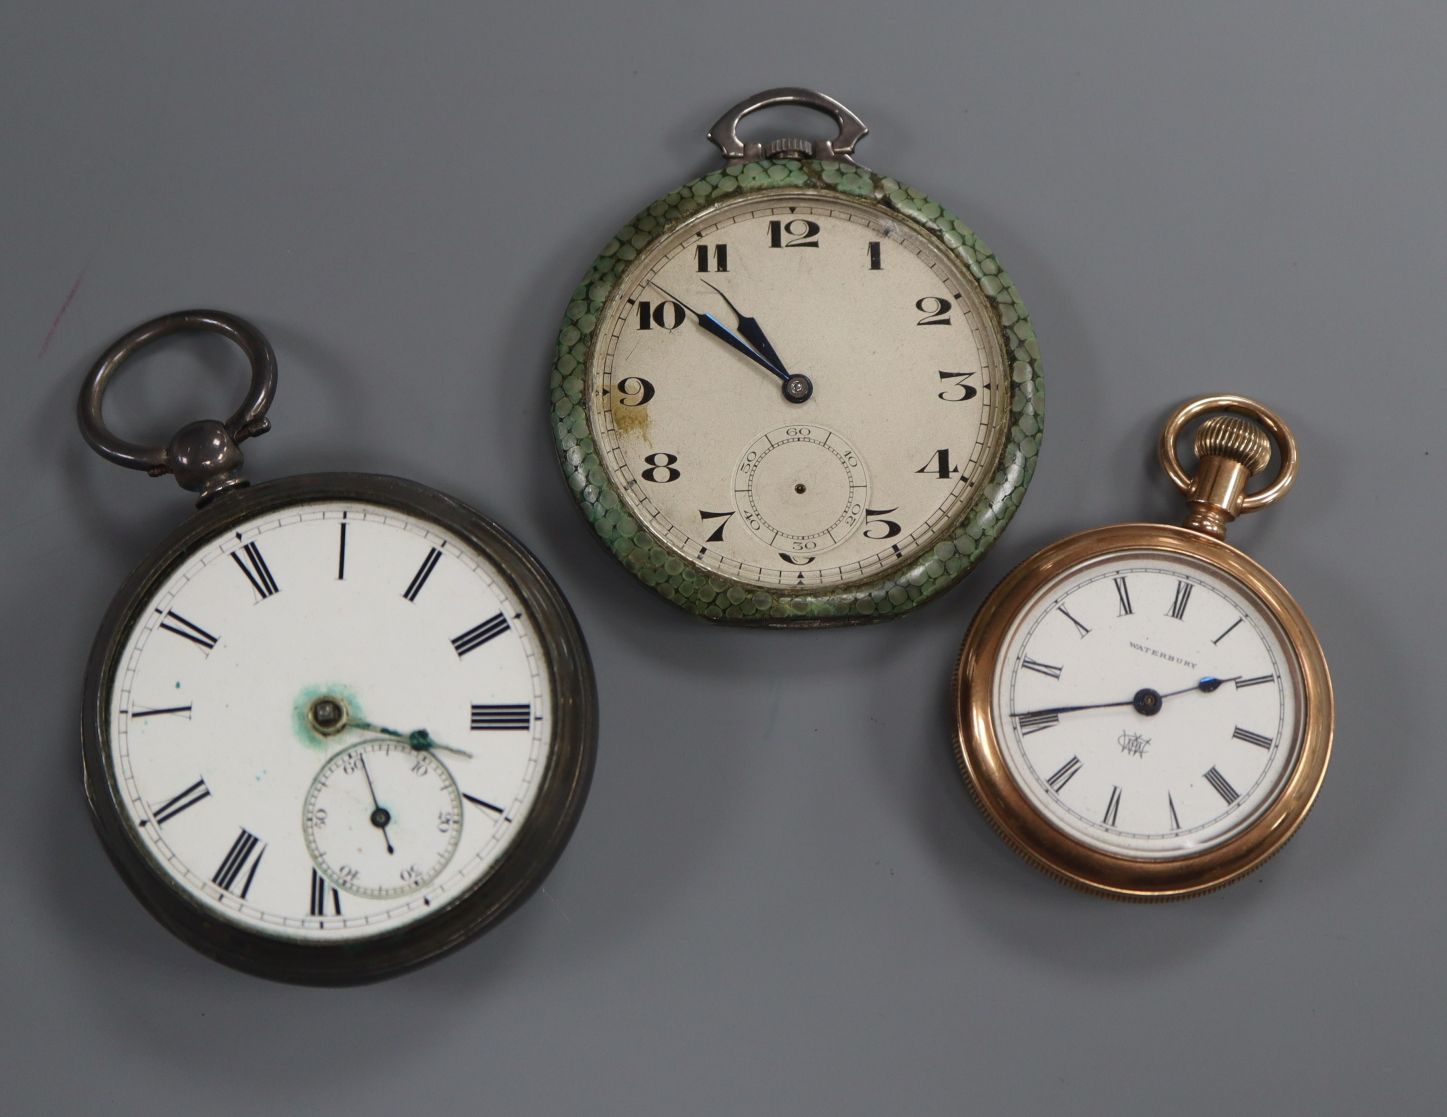 A 1930's? 925 and shagreen cased open face pocket watch, a silver pocket watch and a gold plated